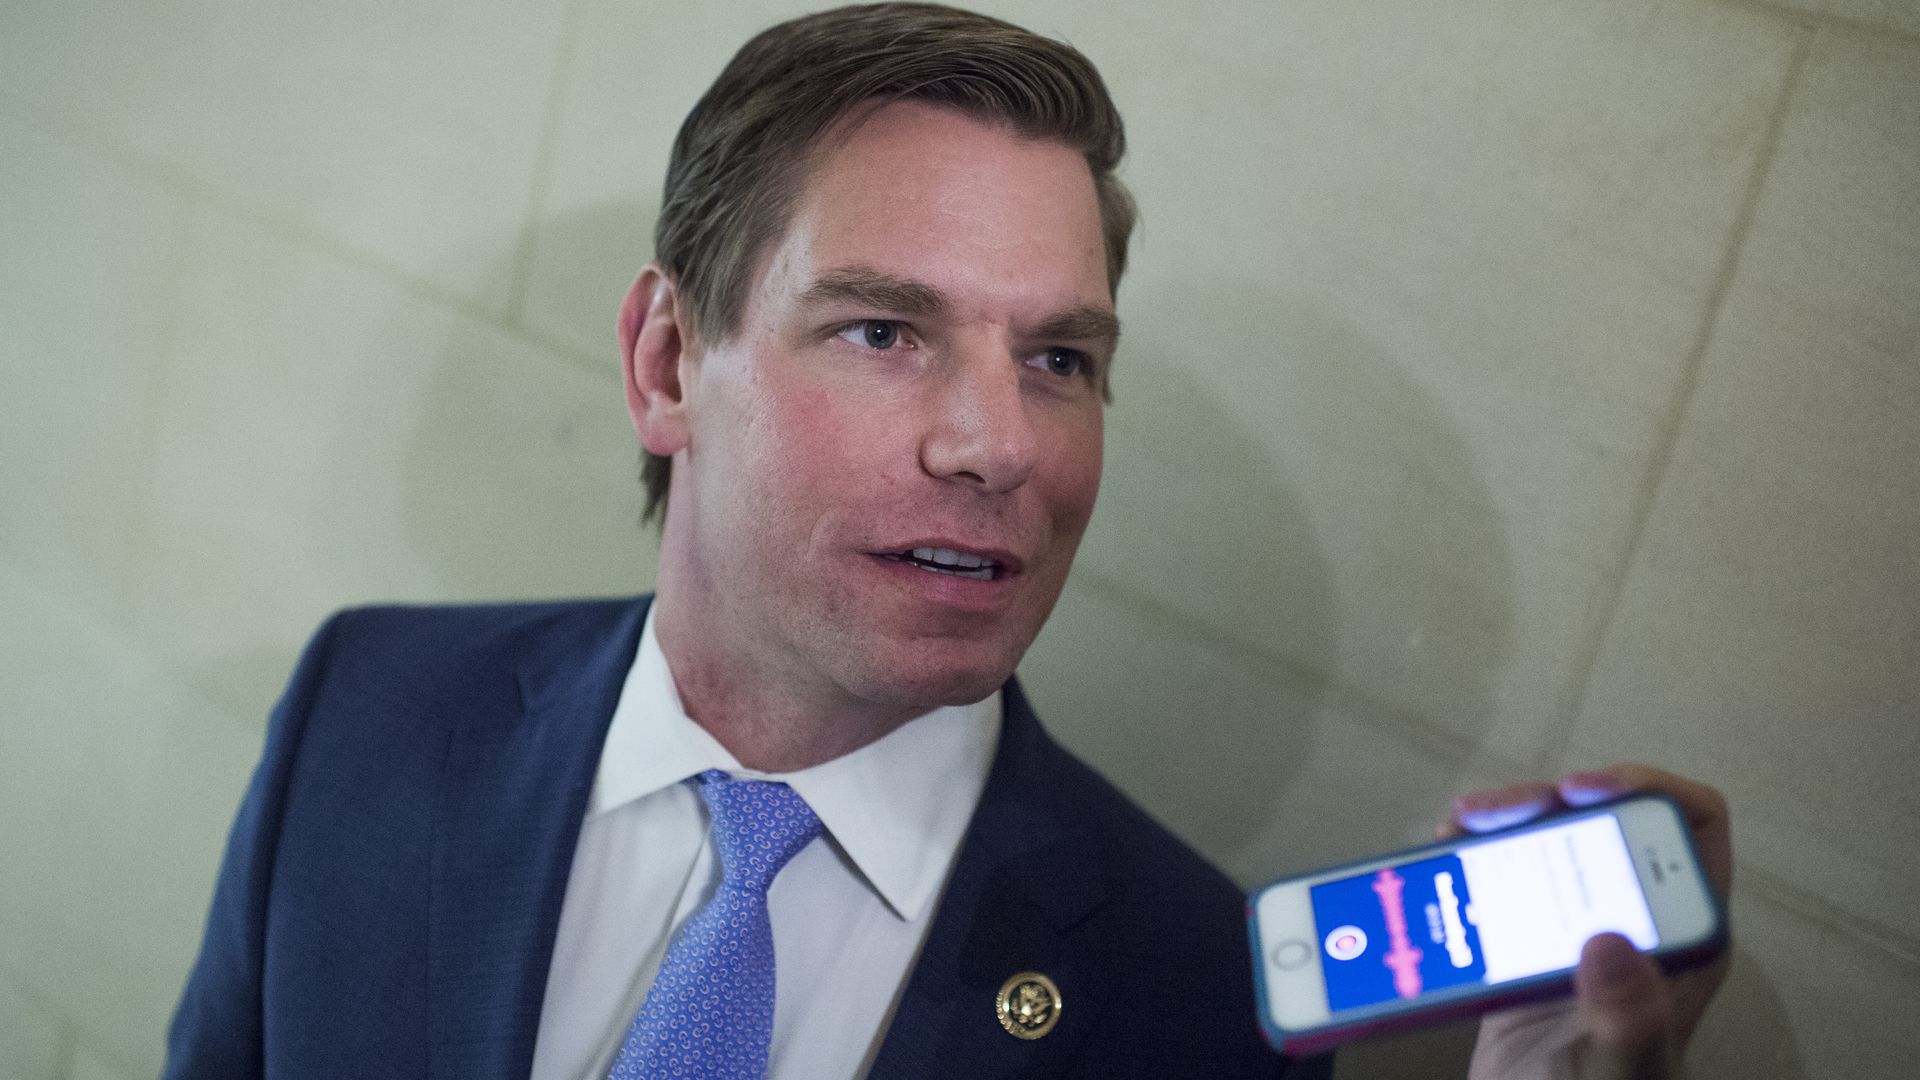 Eric Swalwell talks to a reporter